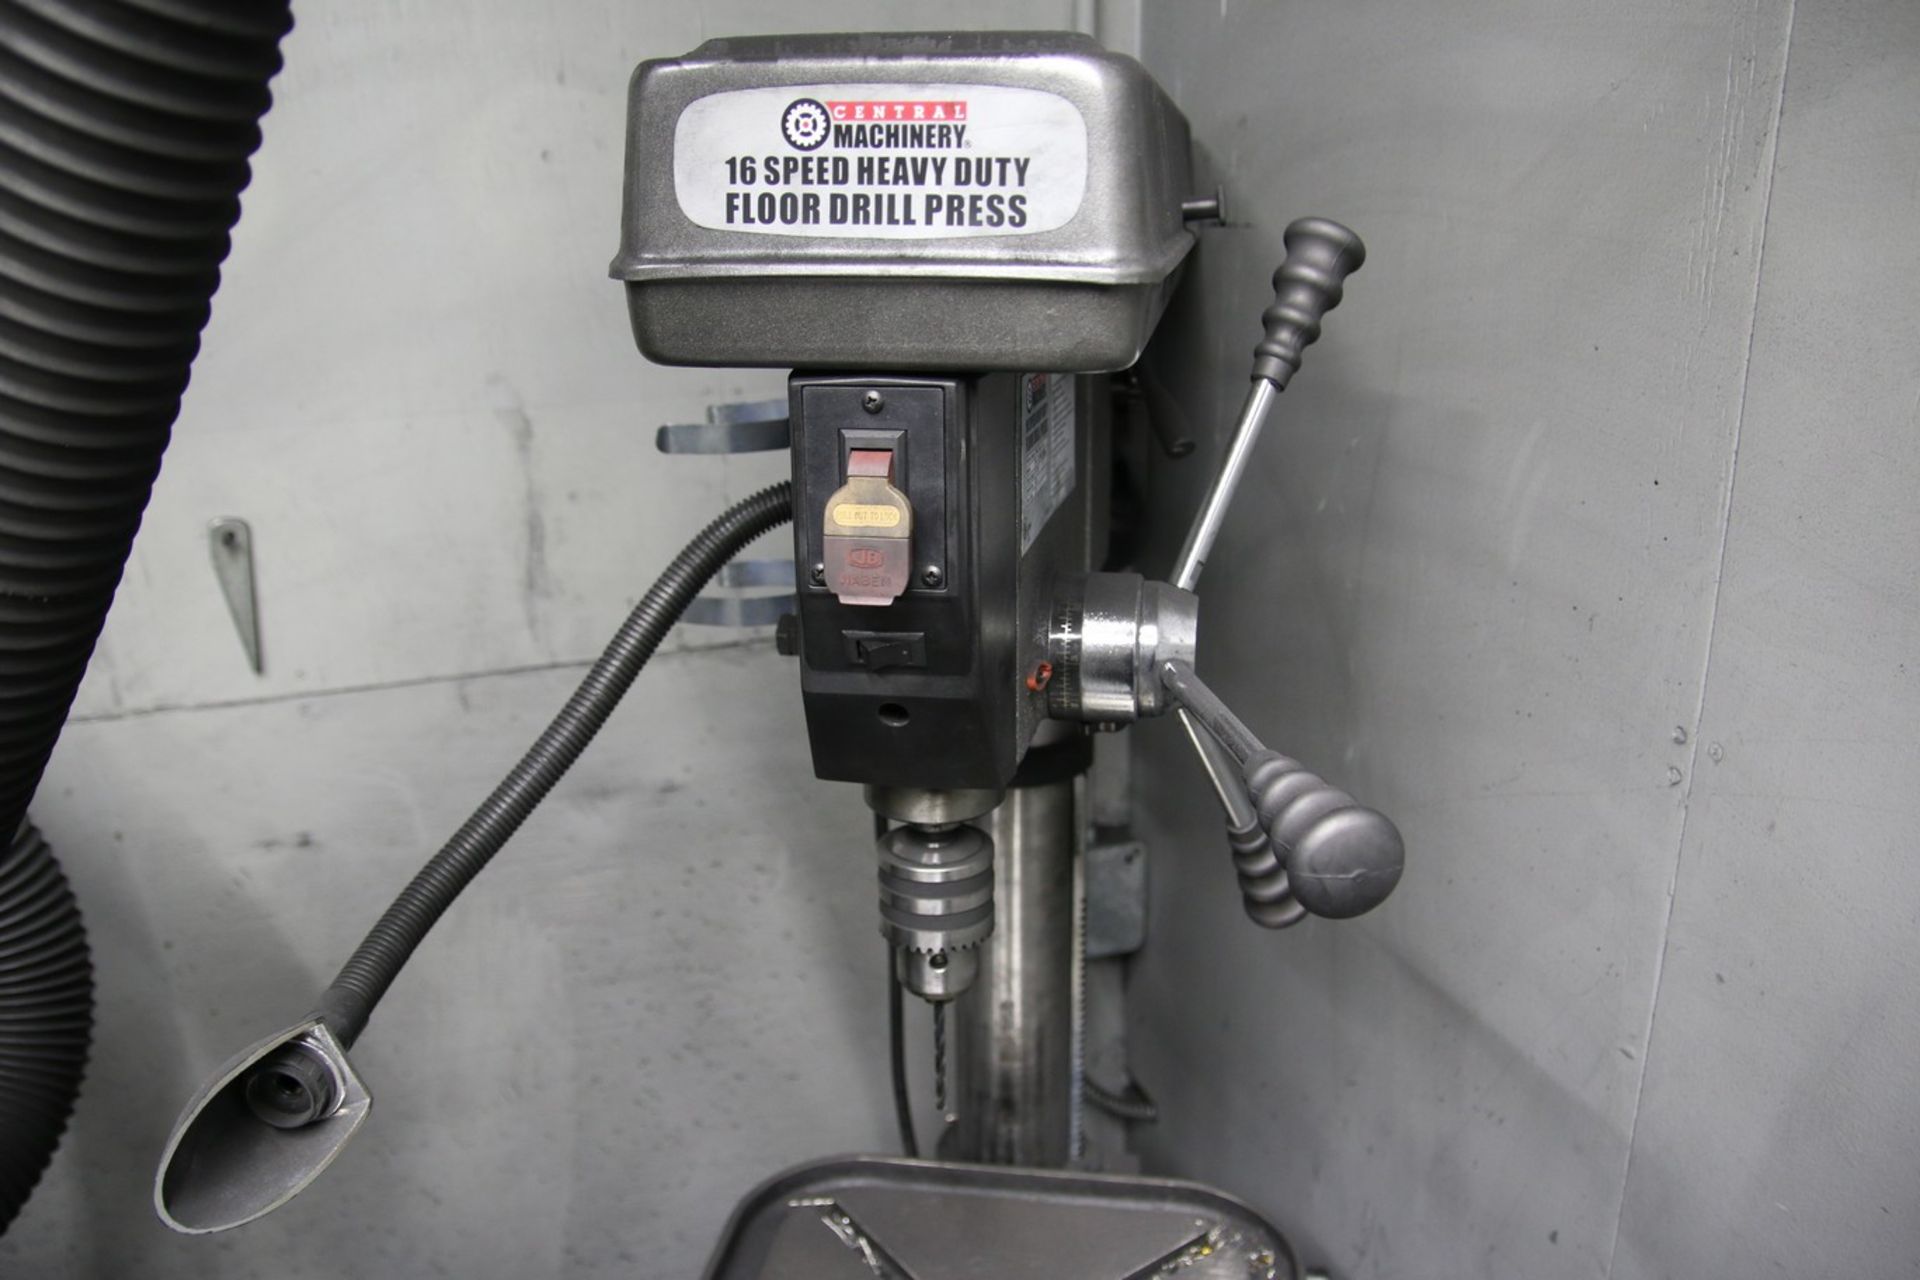 Central Machinery Central Machinery Heavy Duty Floor Drill Press 16 Speed, 3500RPM Maximum - Image 3 of 4